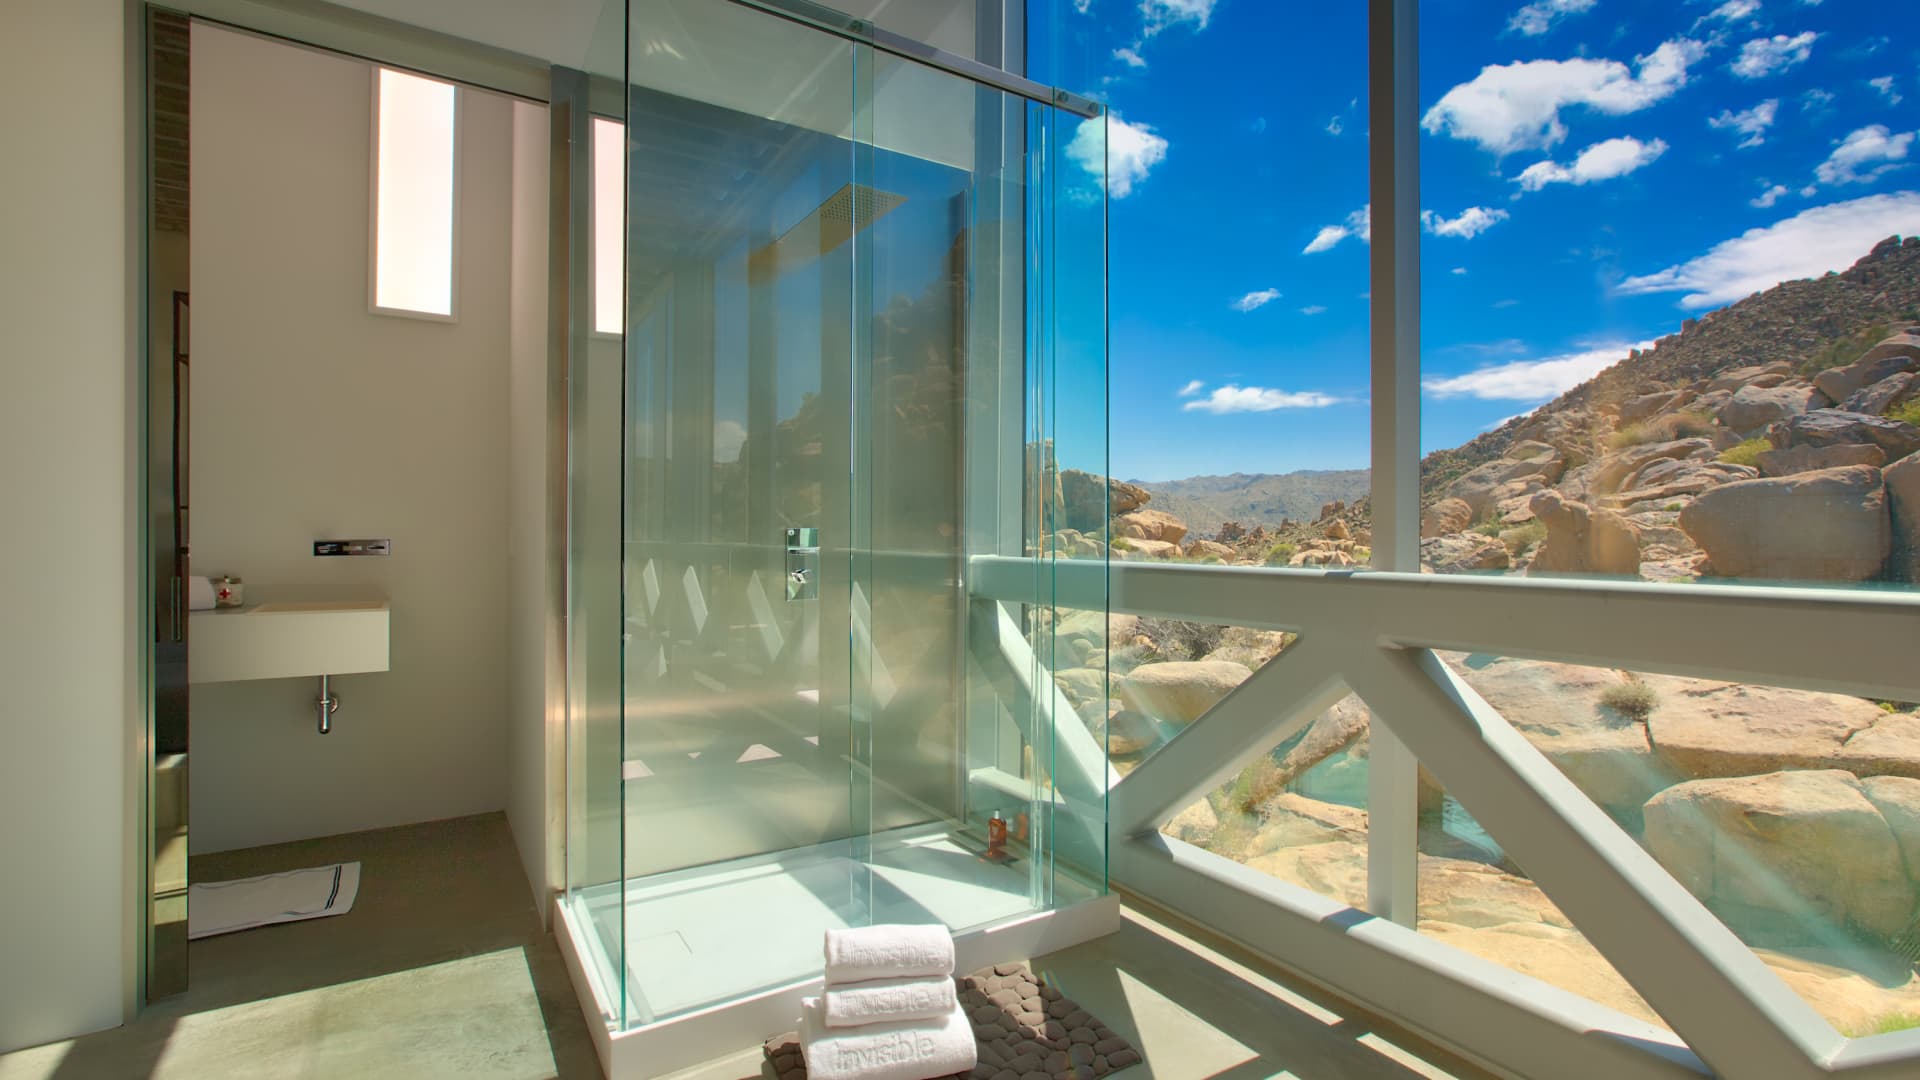 The glass-encased shower in one of the home's guest bedrooms.